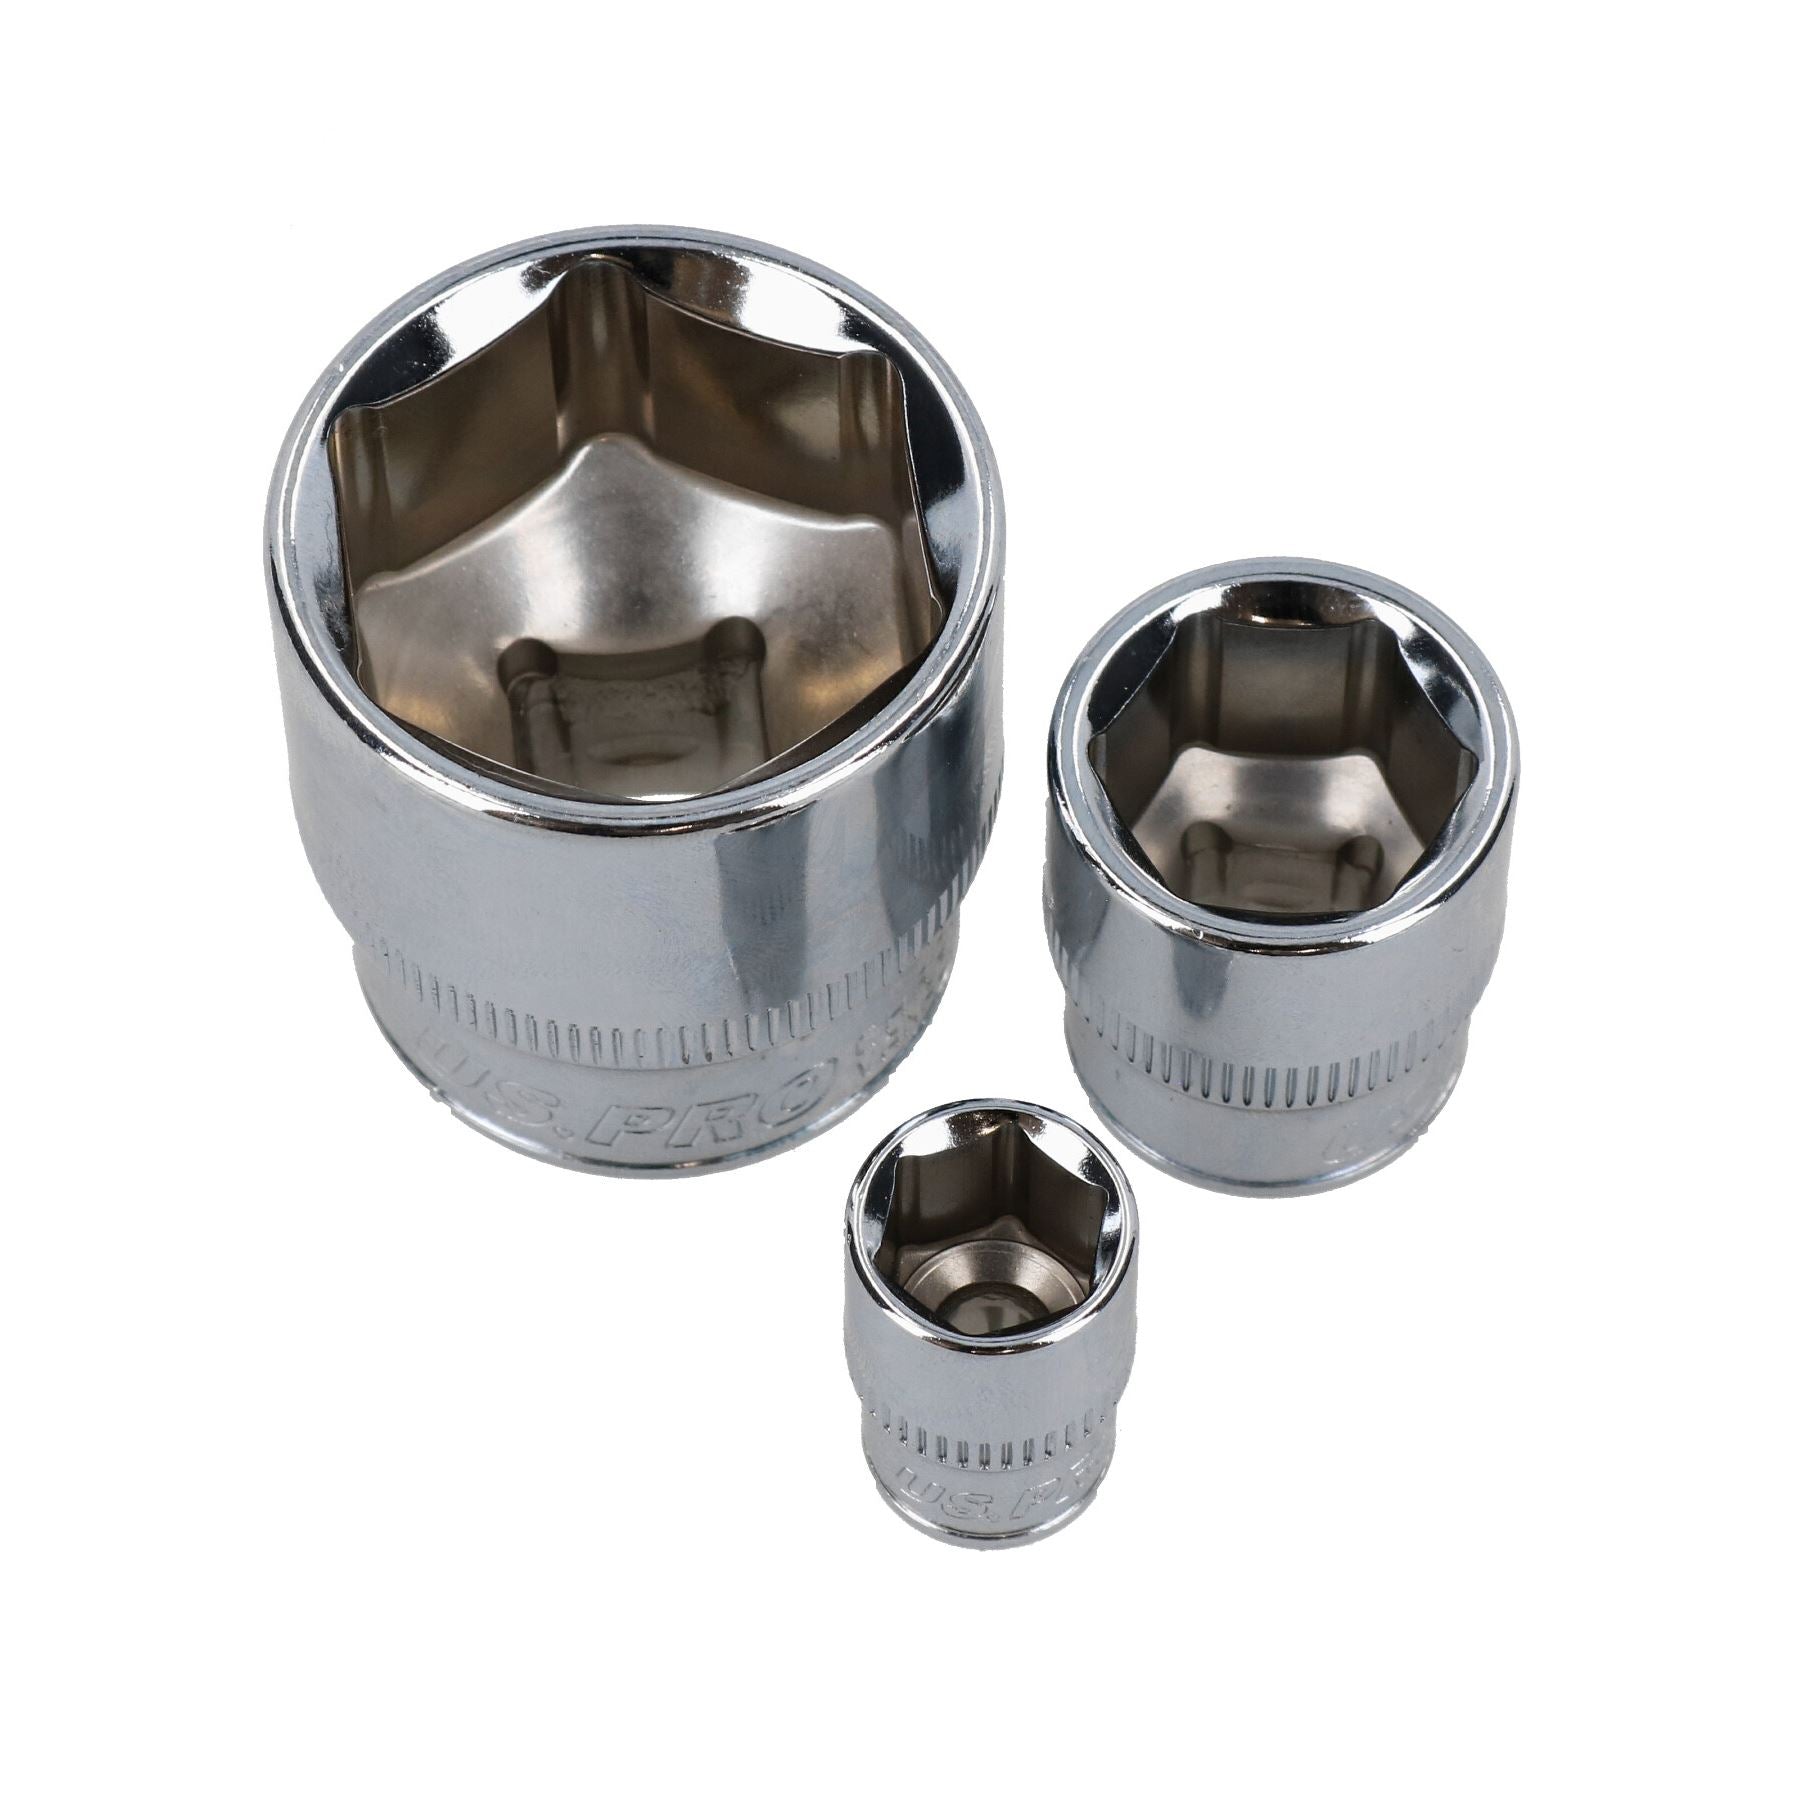 1/4" 3/8" and 1/2" Drive Shallow Metric 6 Sided Sockets